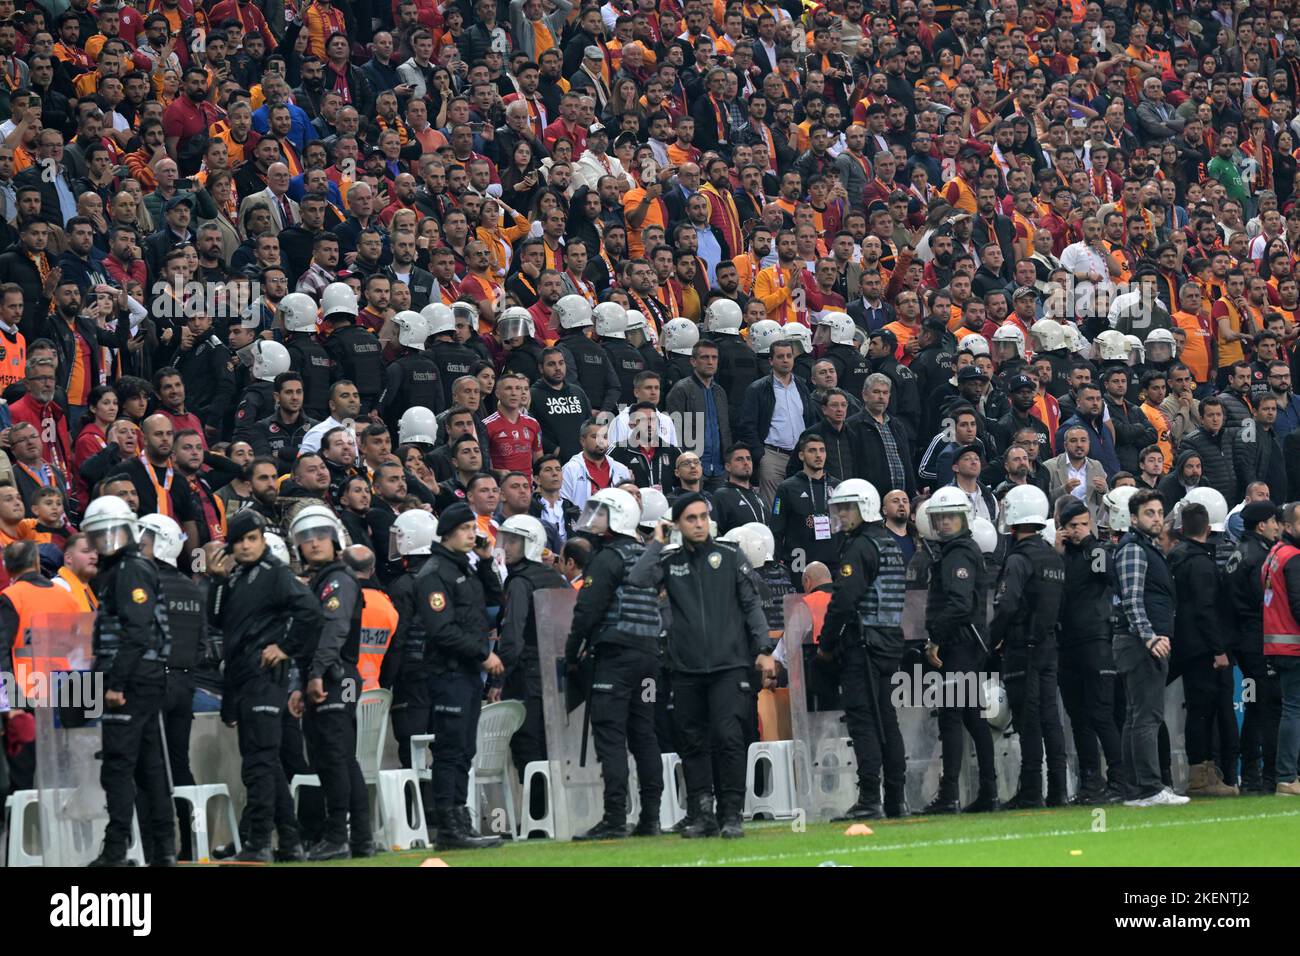 ISTANBUL - Galatasaray supporters during the Turkish Super Lig match between Galatasaray AS and Besiktas AS at Ali Sami Yen Spor Kompleksi stadium on November 5, 2022 in Istanbul, Turkey. ANP | Dutch Height | GERRIT FROM COLOGNE Stock Photo